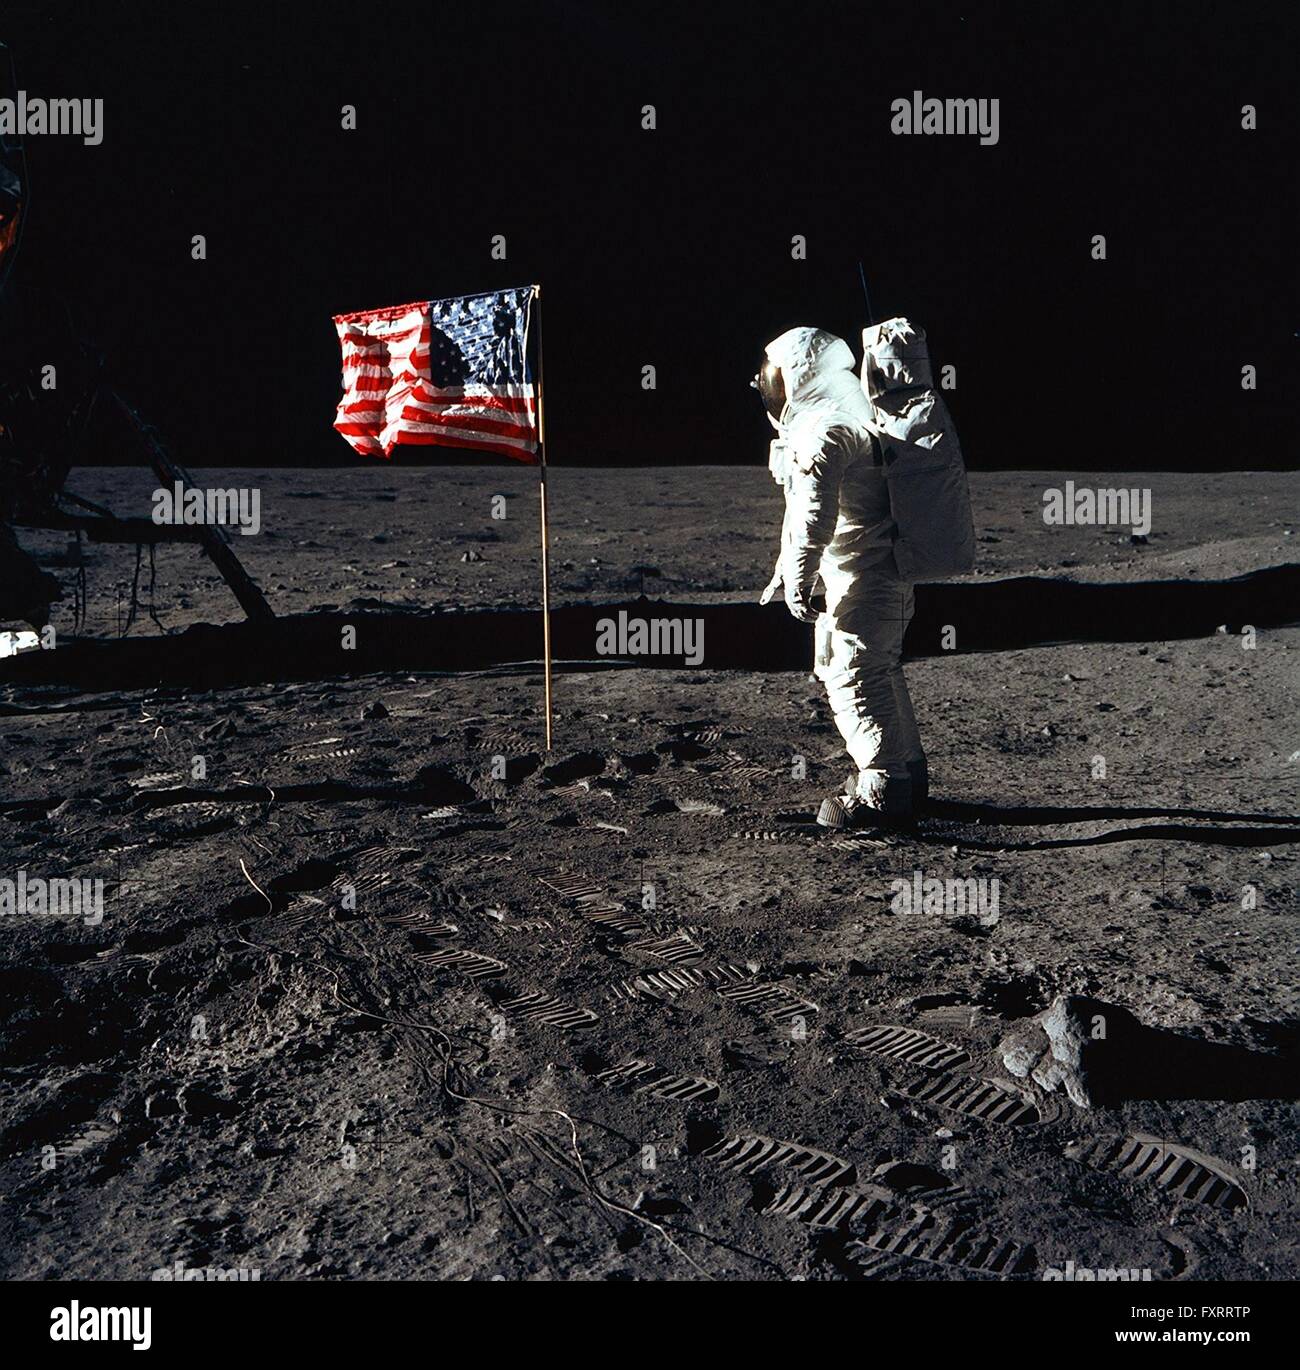 NASA astronaut and lunar module pilot Buzz Aldrin poses for a photograph beside the deployed United States flag during an Apollo 11 extravehicular activity on the lunar surface July 20, 1969 in Sea of Tranquility, Moon. Stock Photo